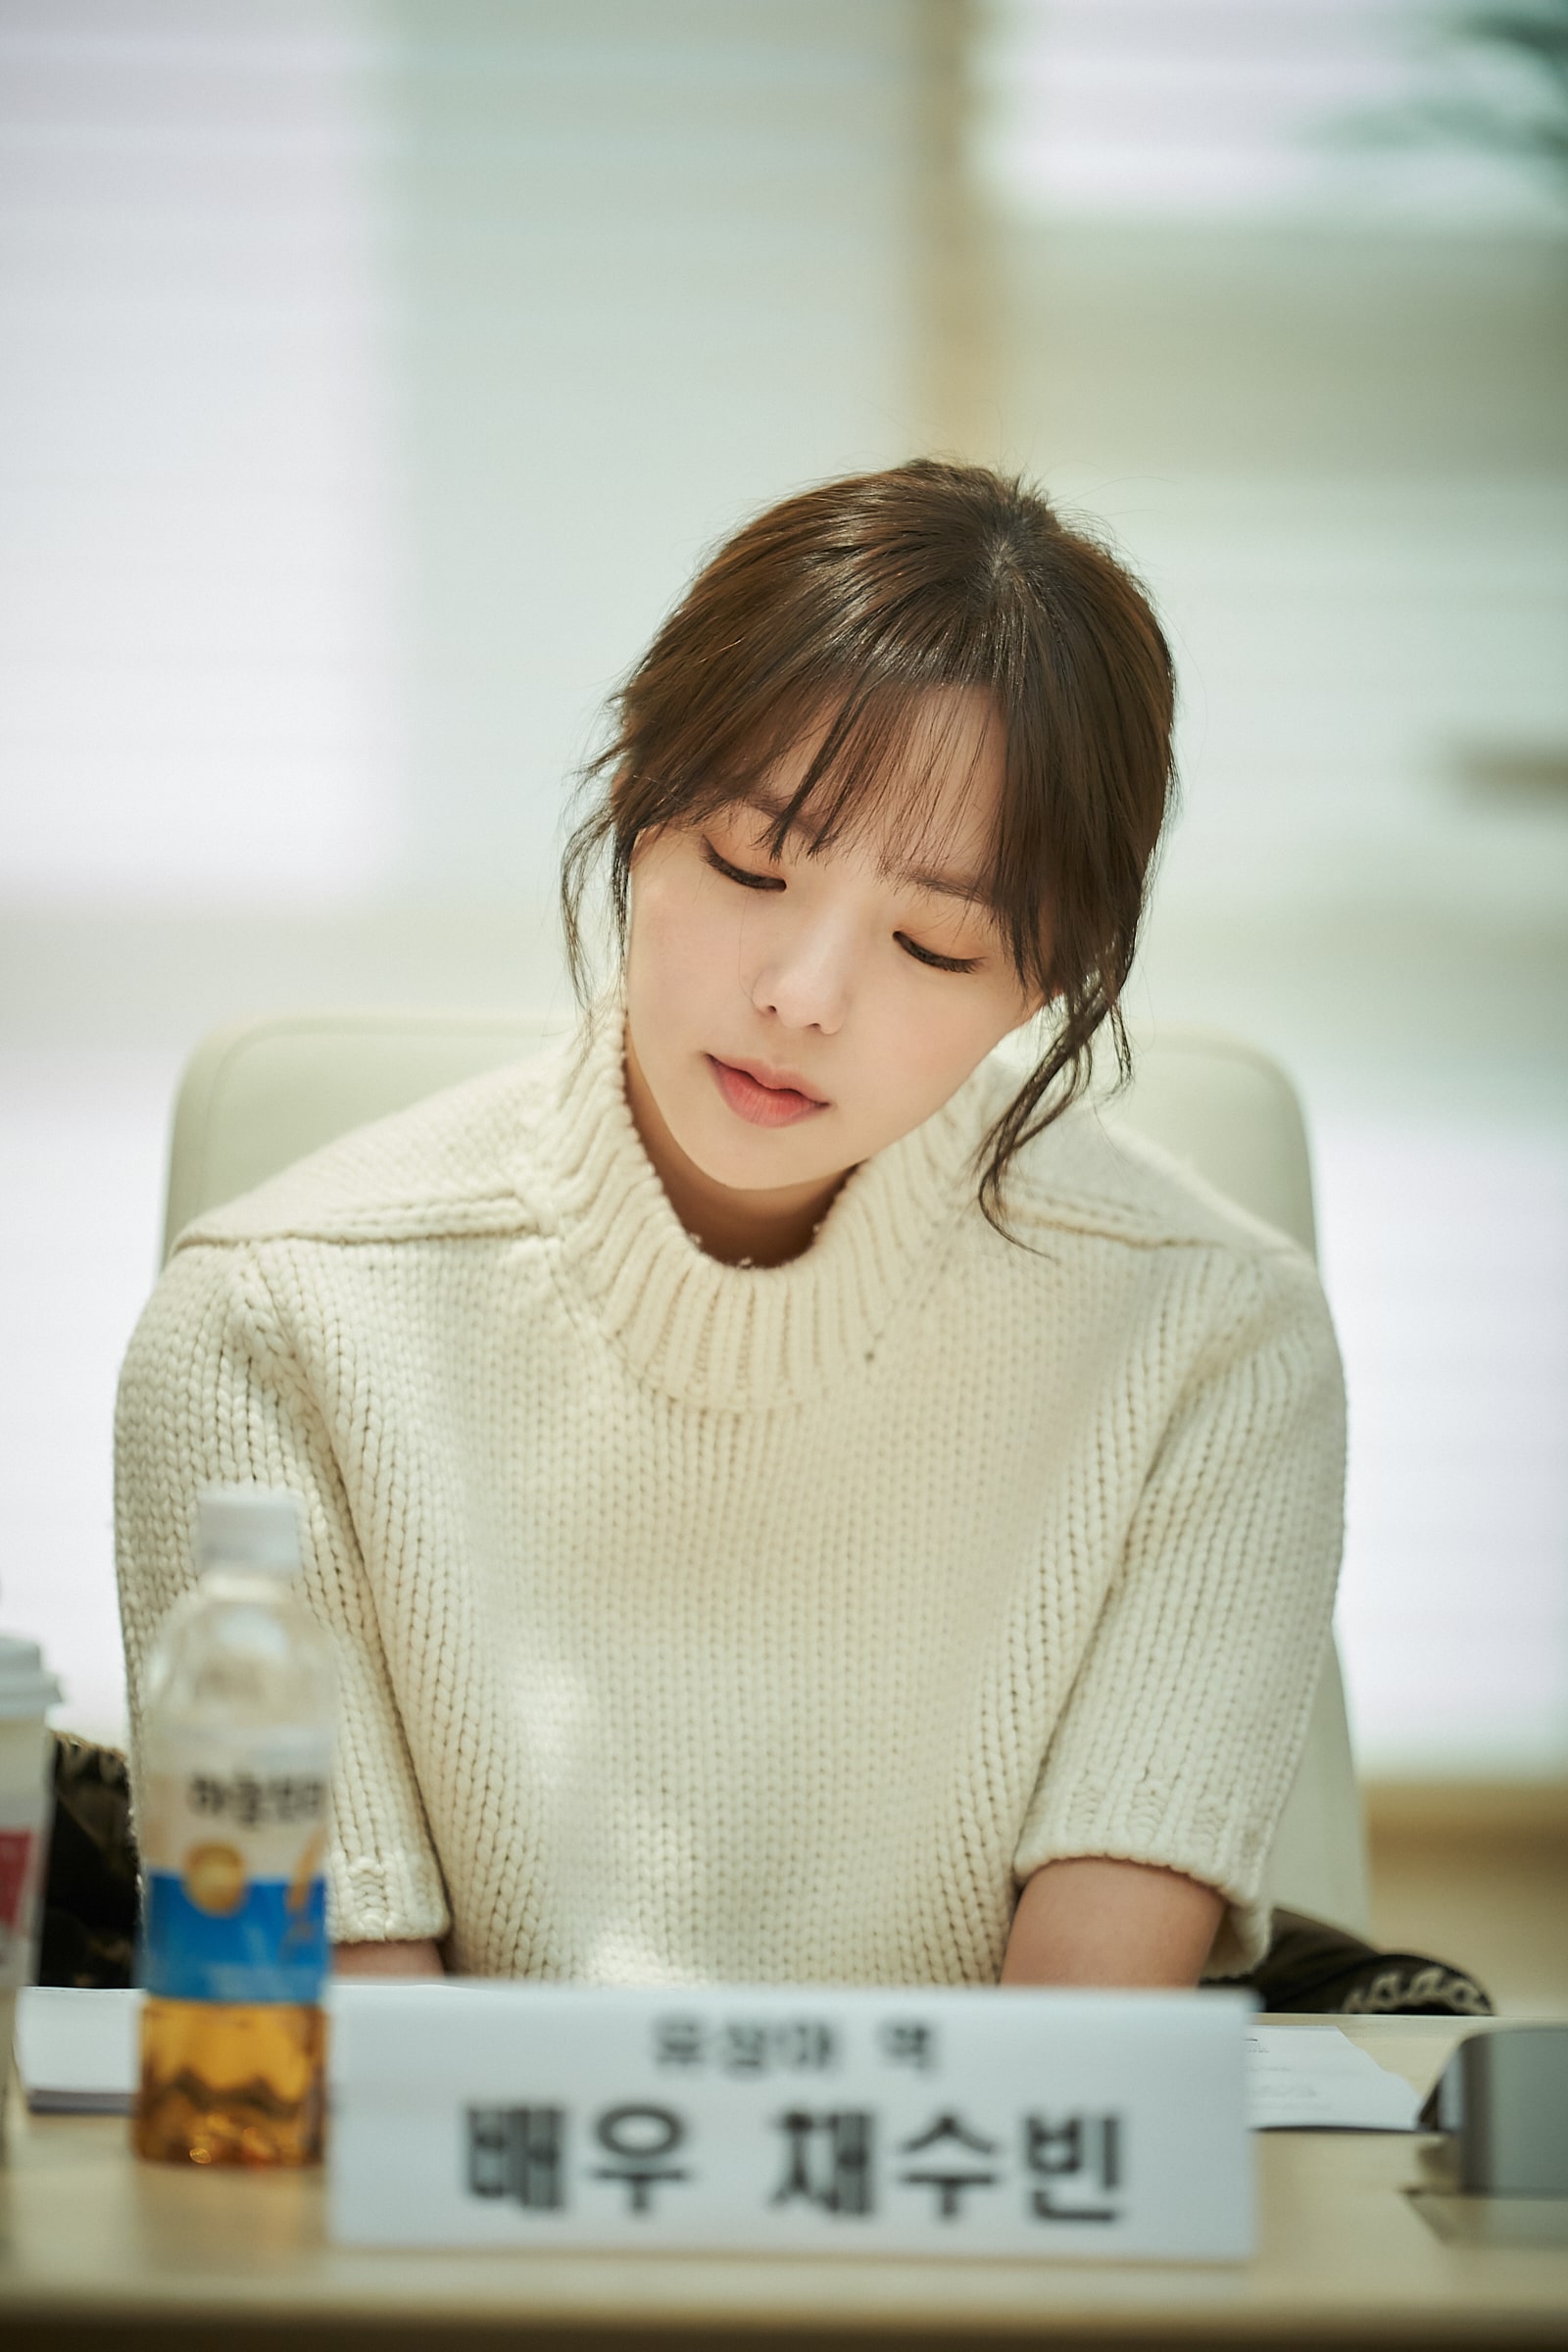 Chae Soo Bin at the Omniscient Reader's Viewpoint script reading